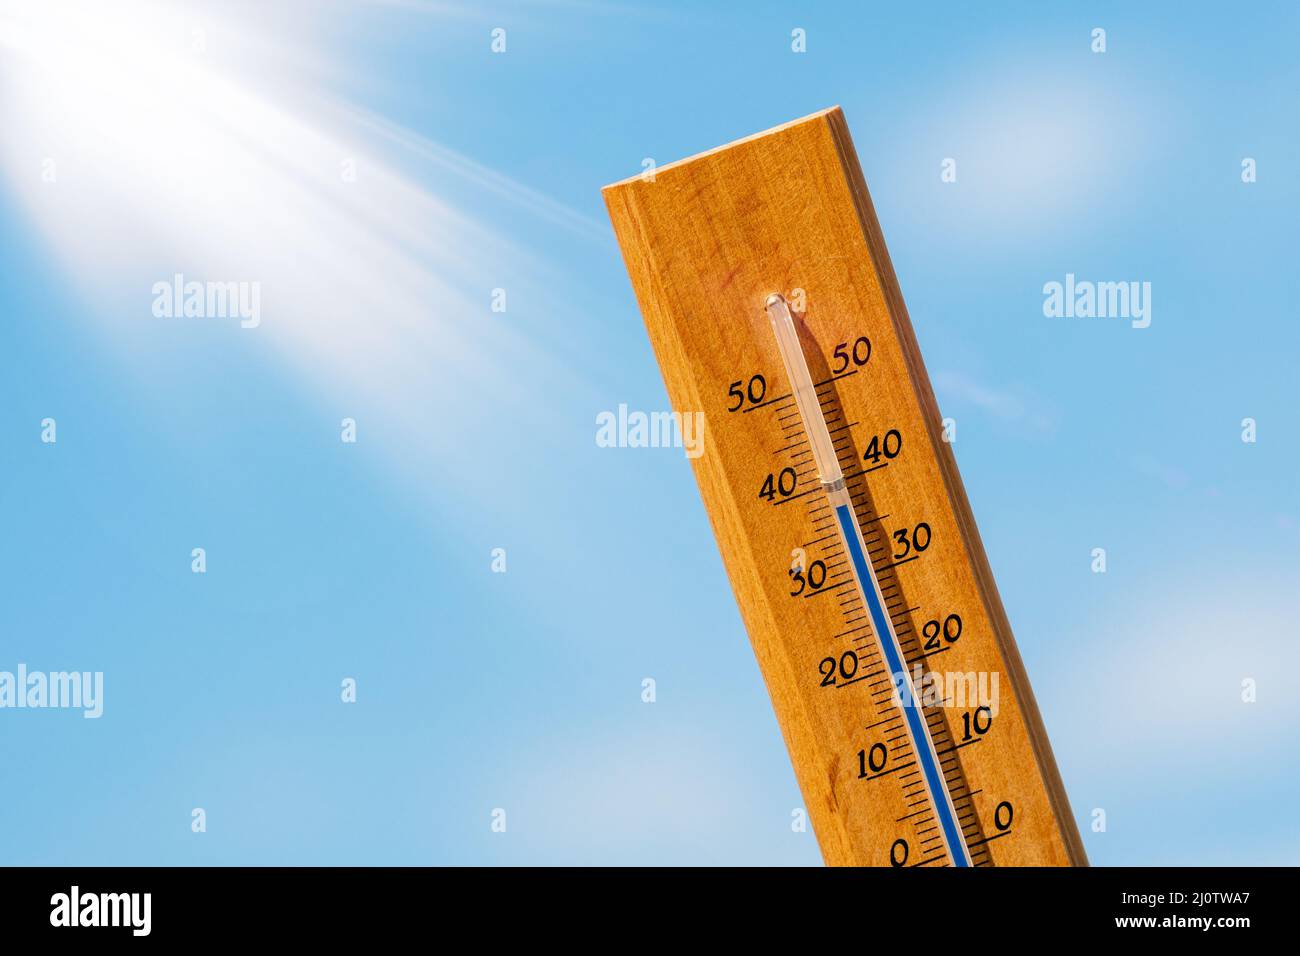 https://c8.alamy.com/comp/2J0TWA7/thermometer-with-a-high-temperature-reading-on-a-scale-2J0TWA7.jpg